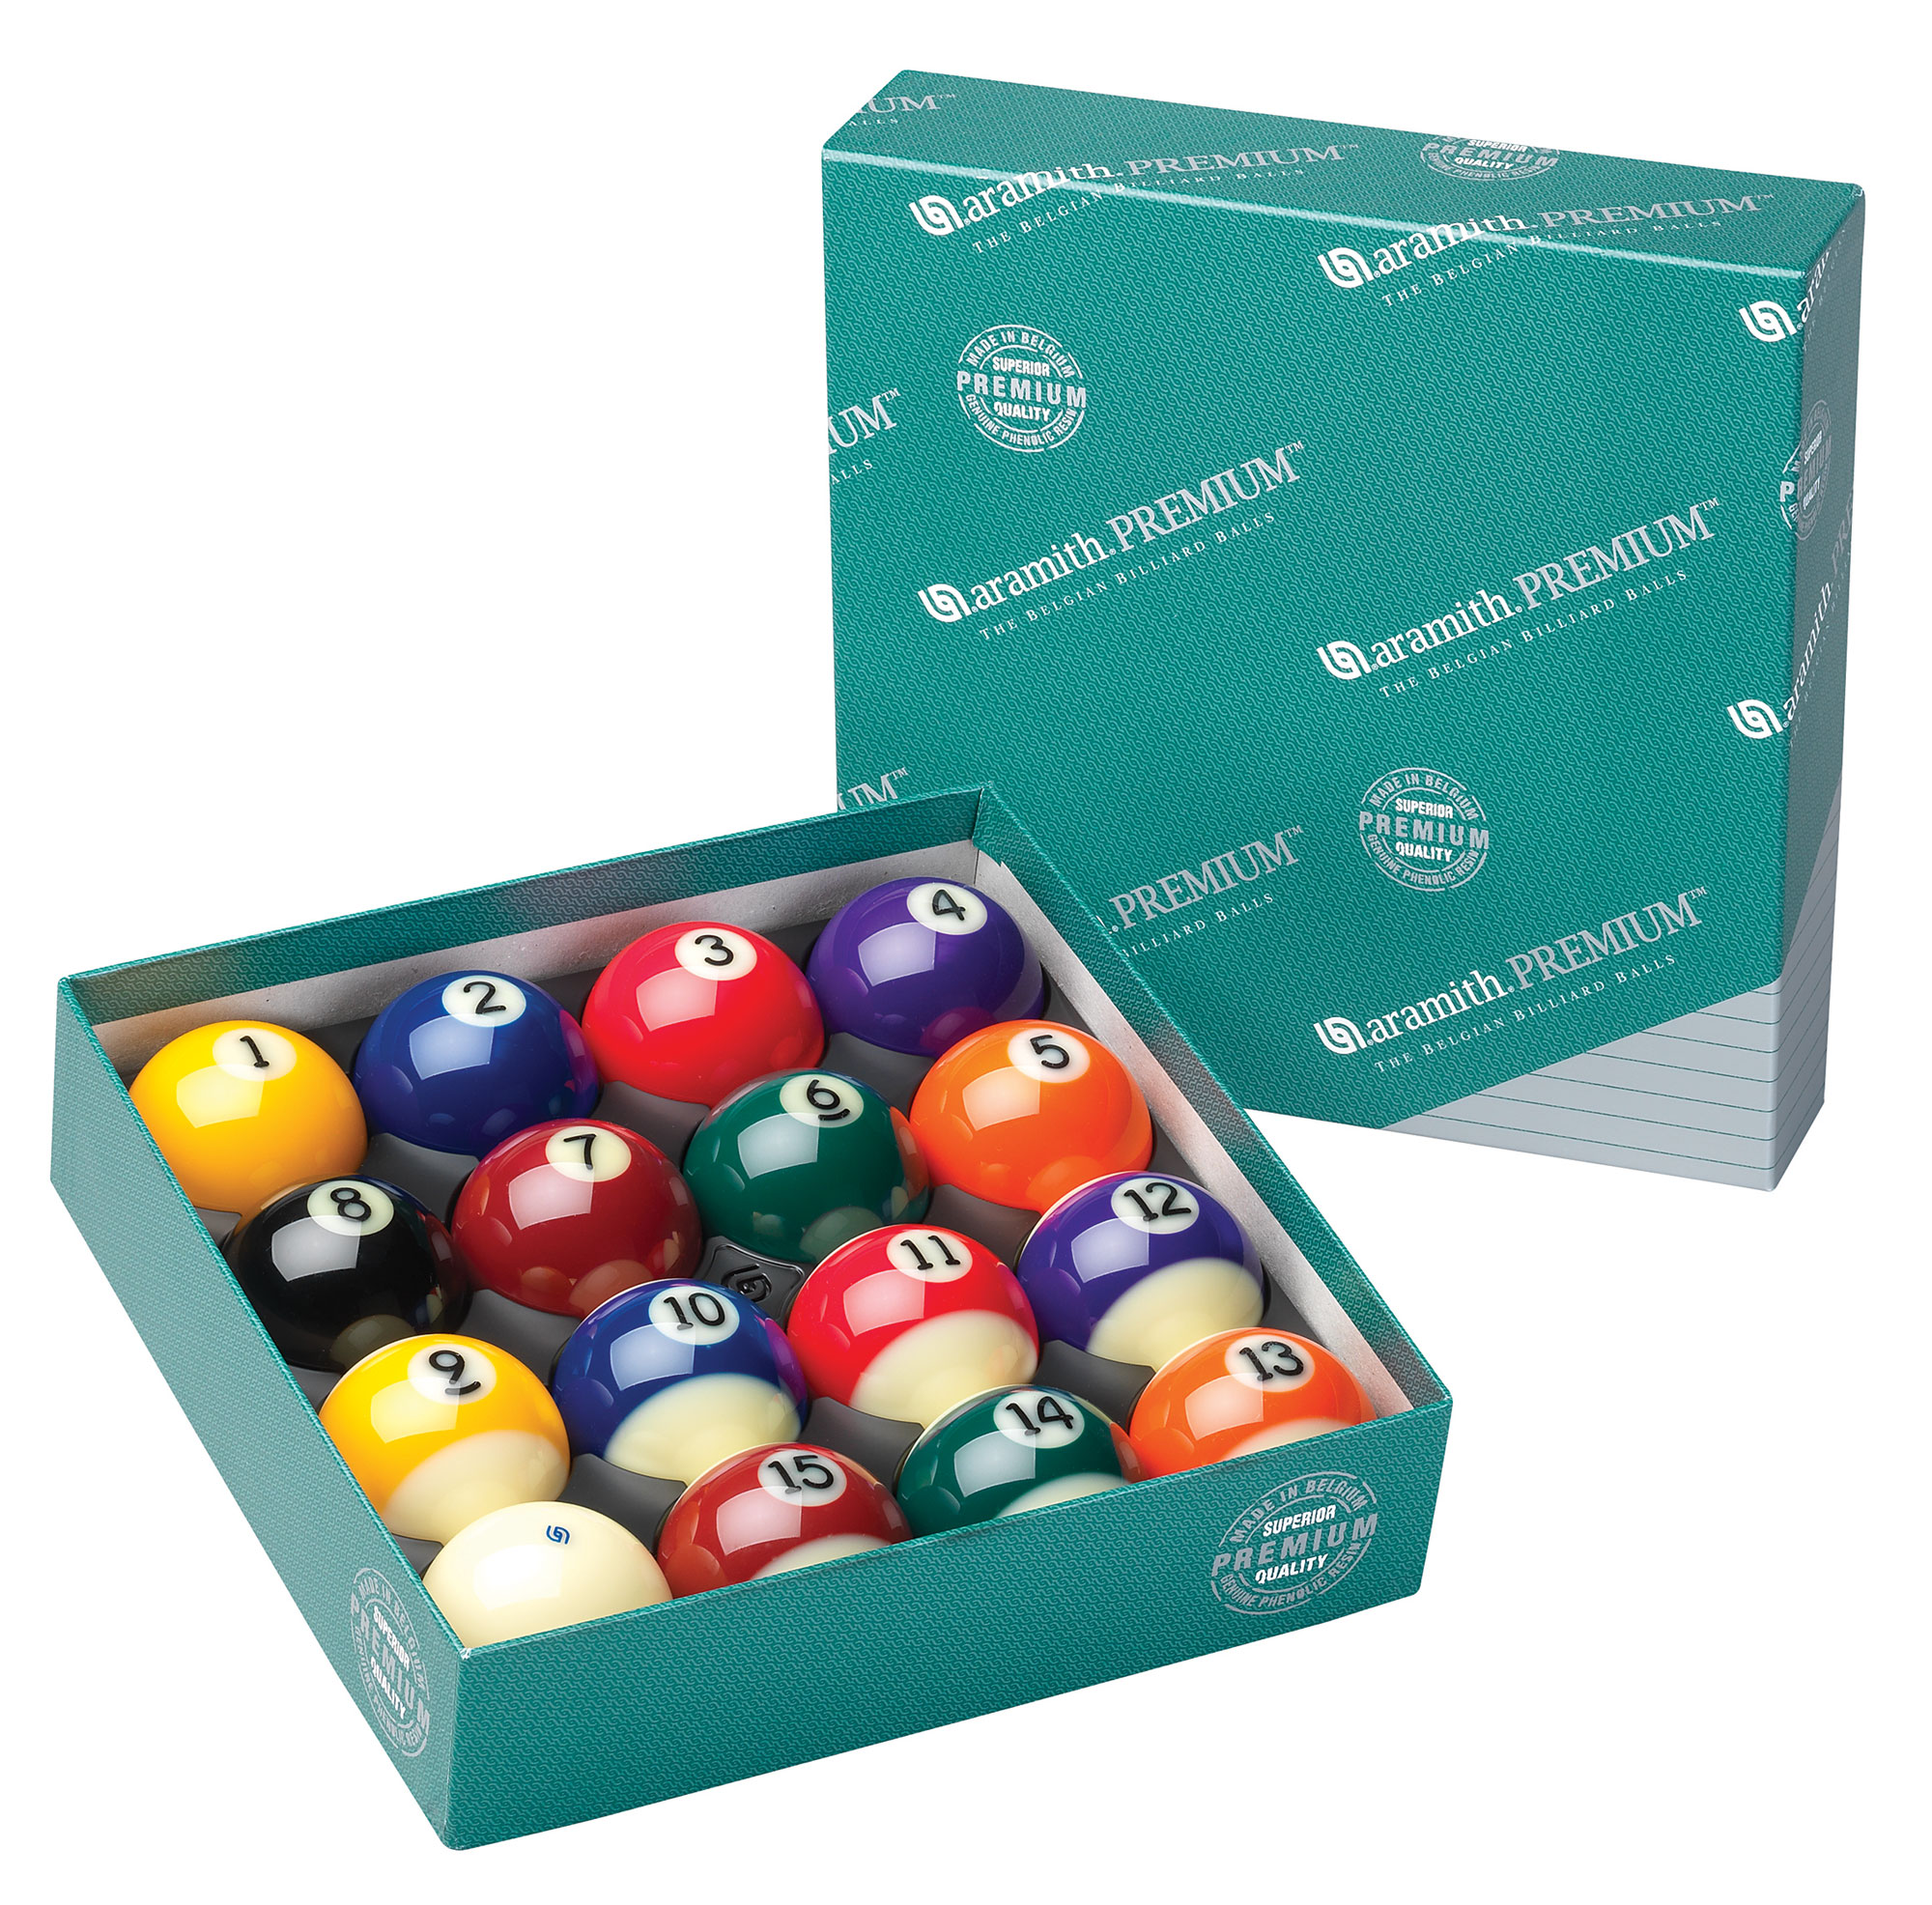 Image of a professional pool ball set neatly arranged in a box, perfect for pool player gifts